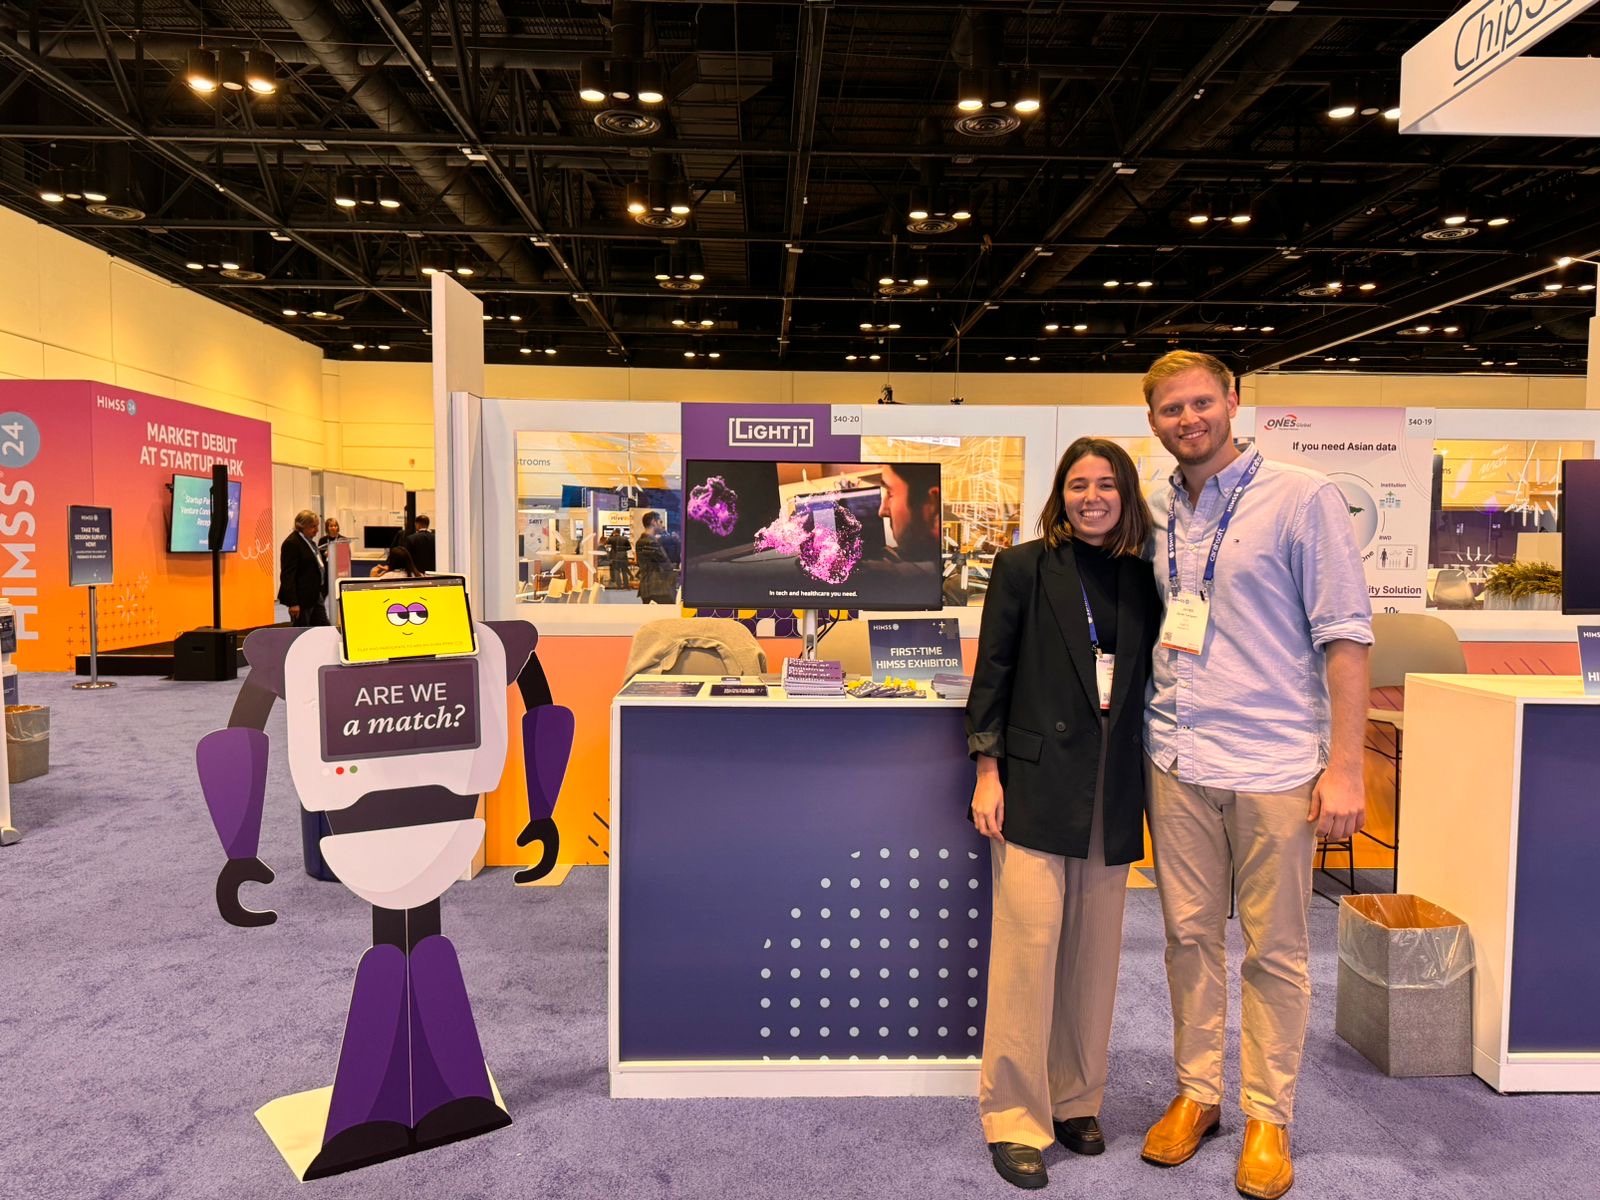 Josefina Ruiz, Head of Growth, and Javier Lempert, CTO & Co-founder at Light-it, at our sponsor booth together with our Gen AI-powered matchmaker robot. 